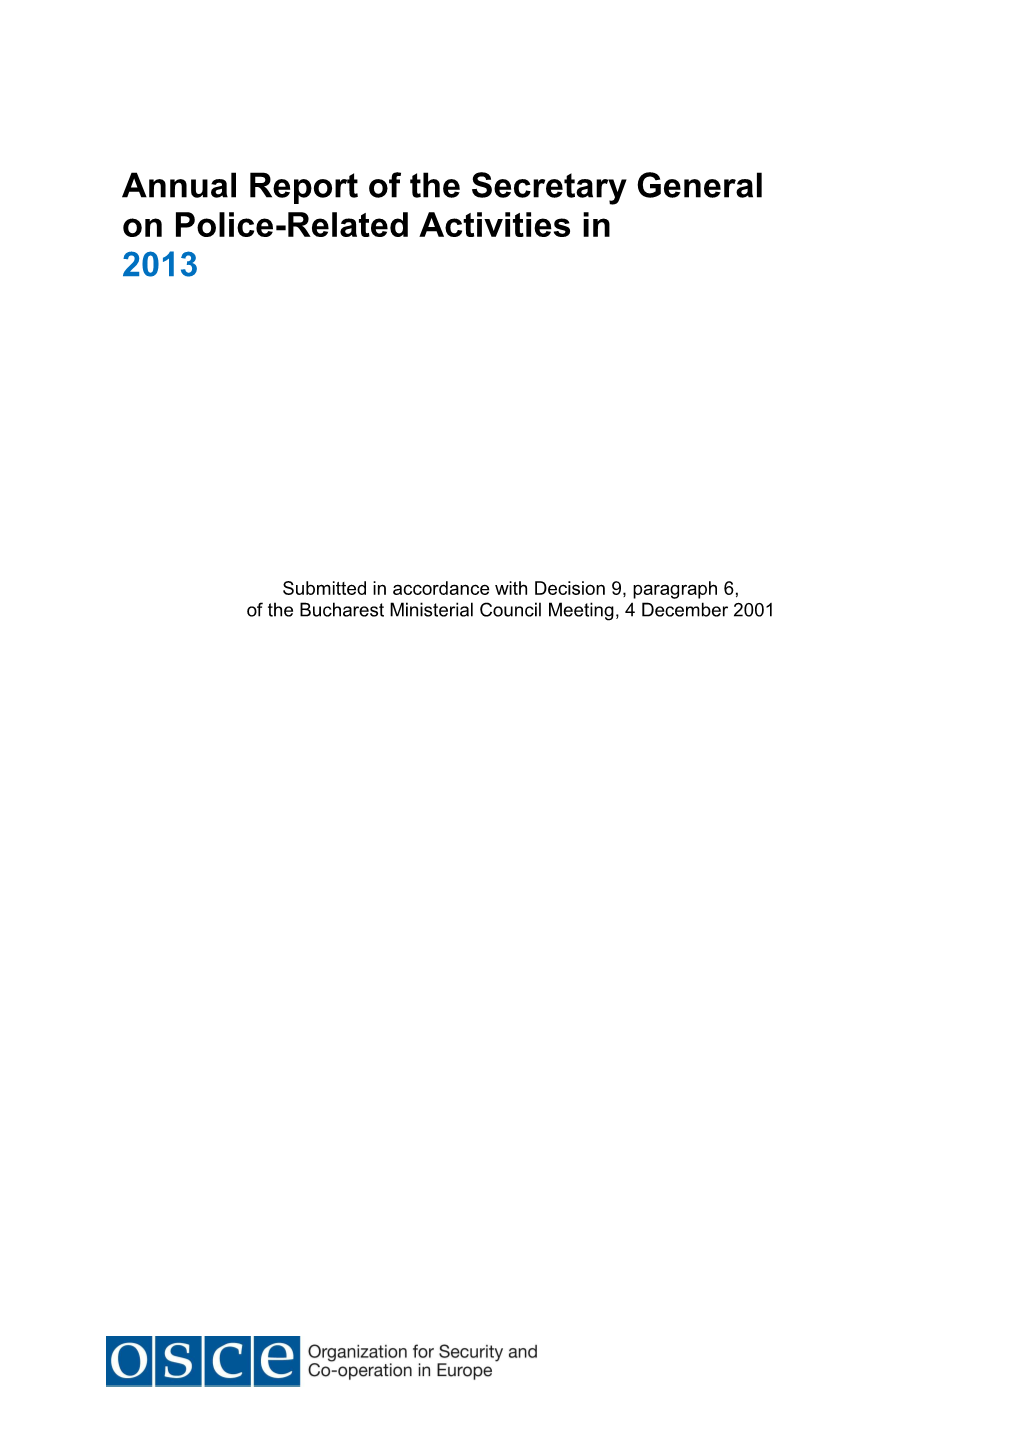 SG AR on Police-Related Activities 2013